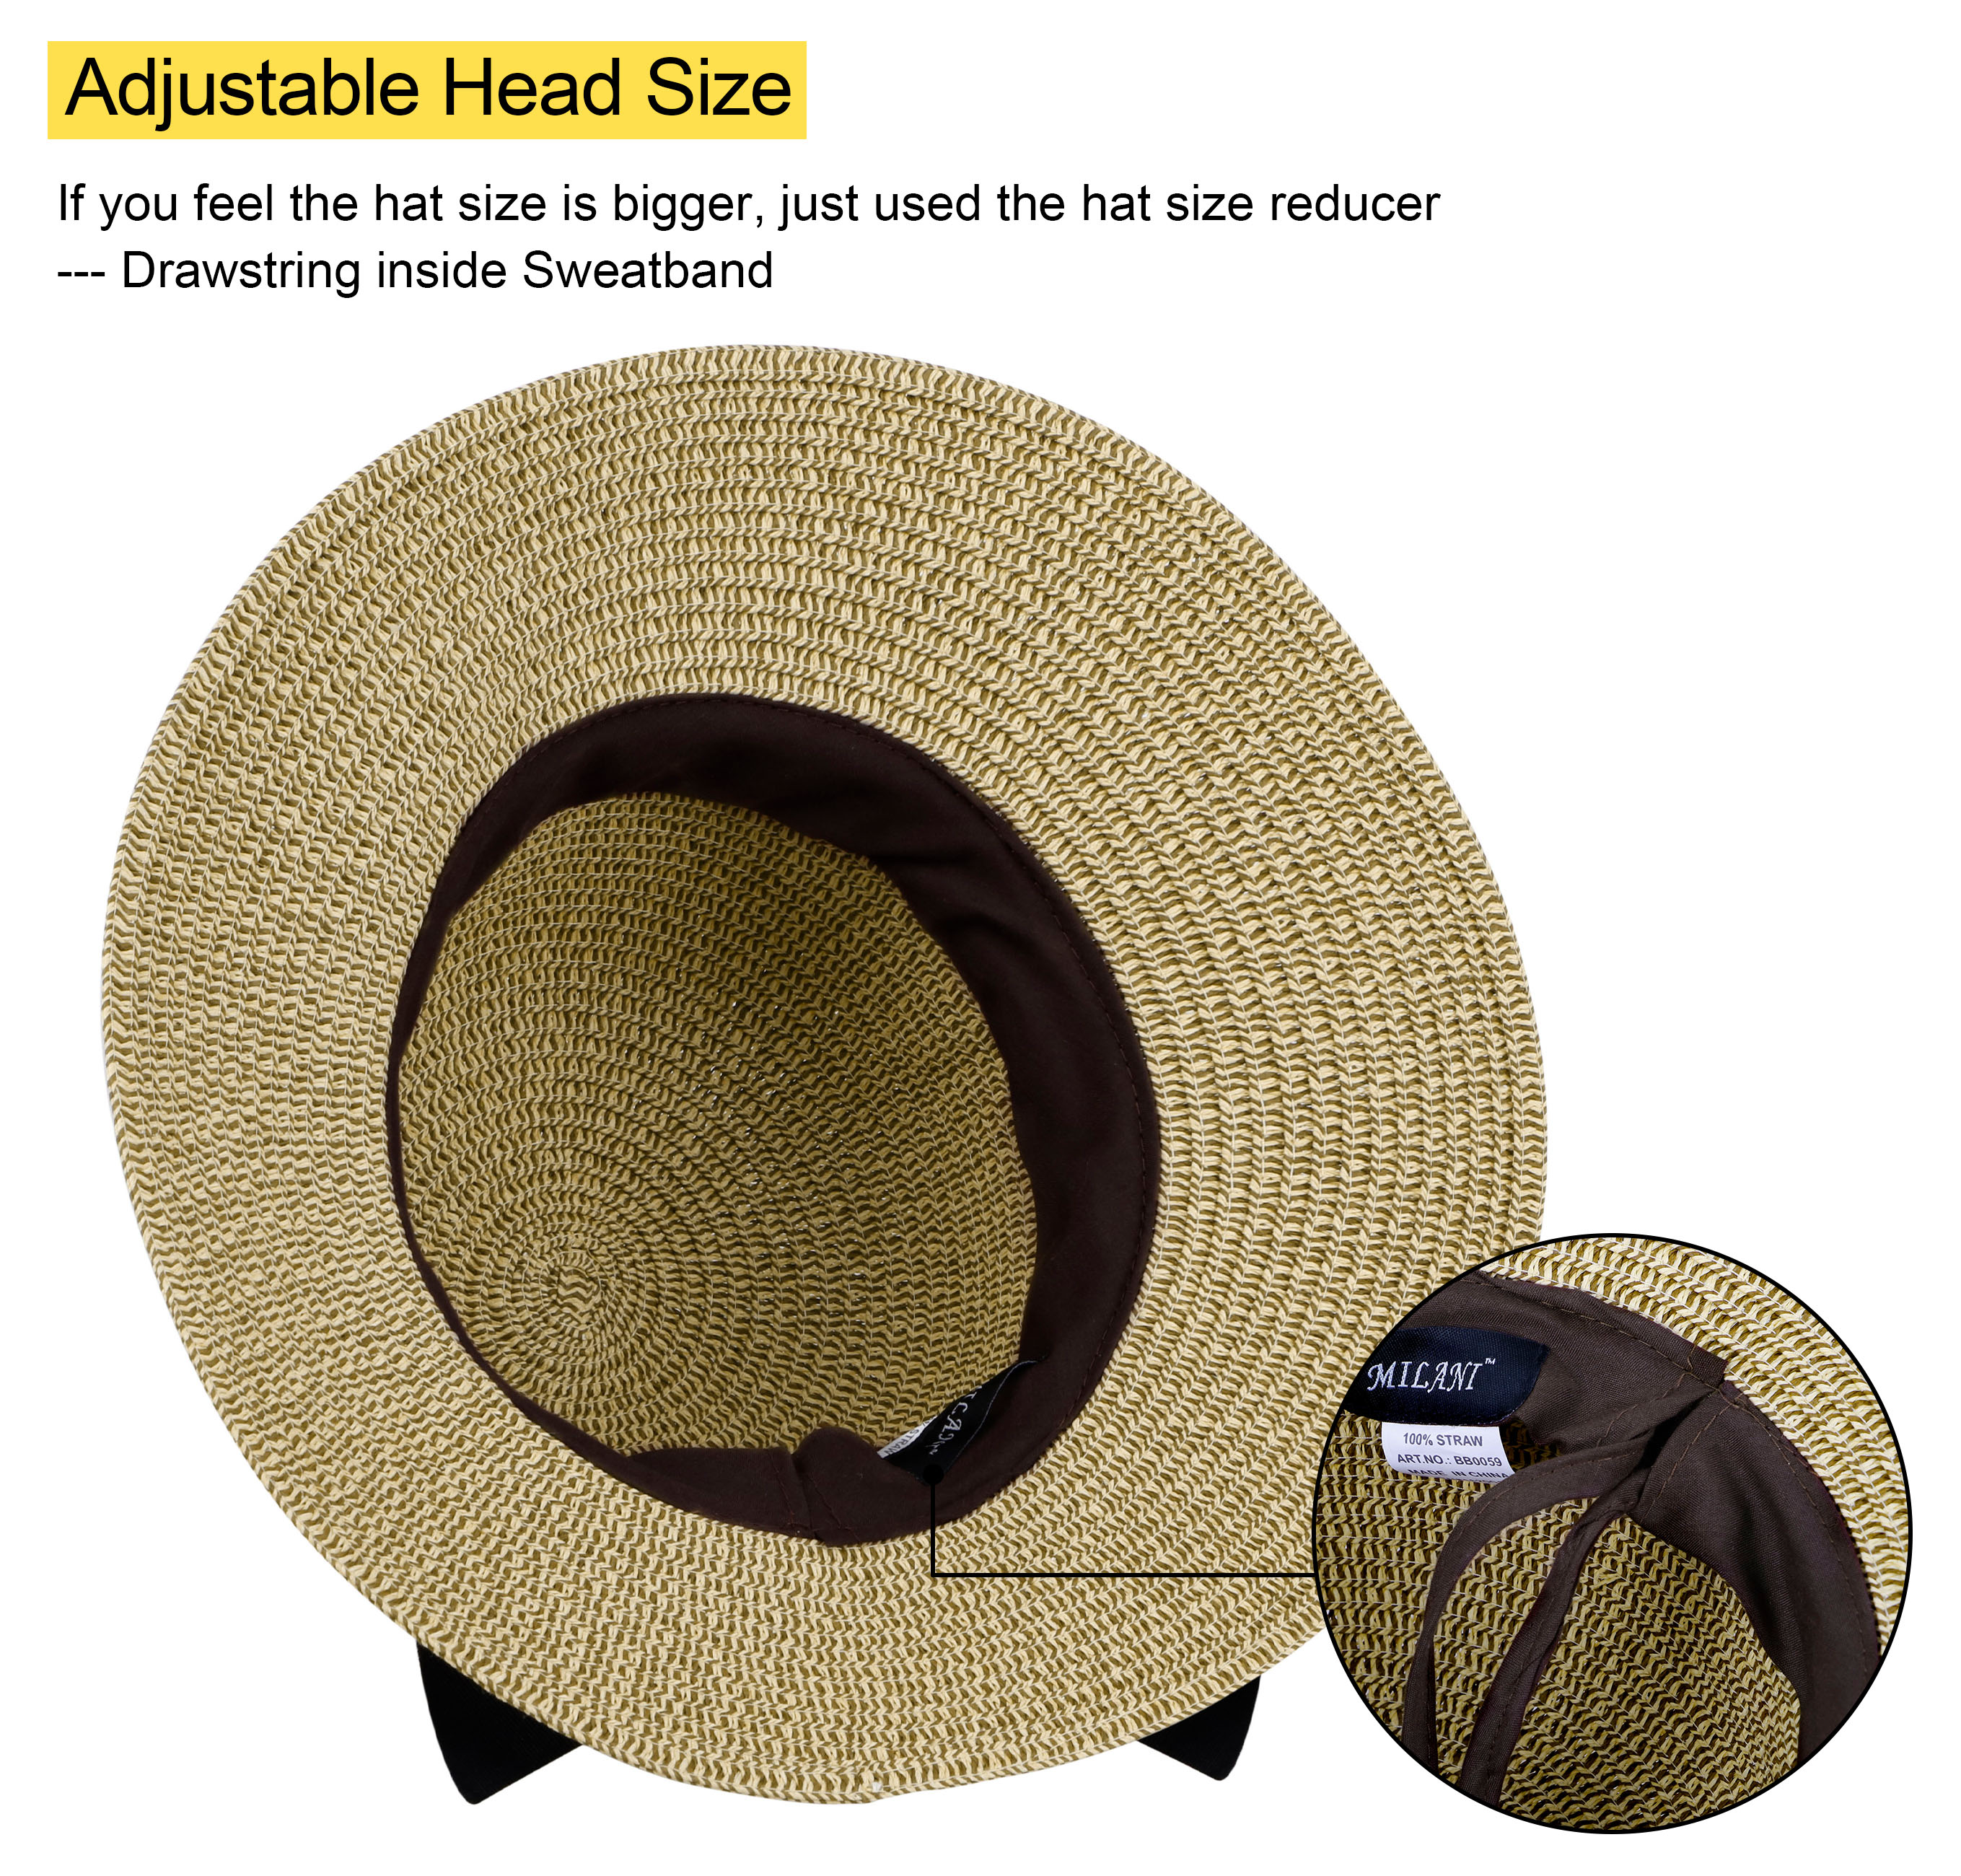 Women's Sun Hats UV Protection Large Wide Brim Hat Women Packable Sun Hat for Women Straw Hats With Bow Tie Womens Beach Hat Womens Sun Hat,Dark Brown - image 5 of 7